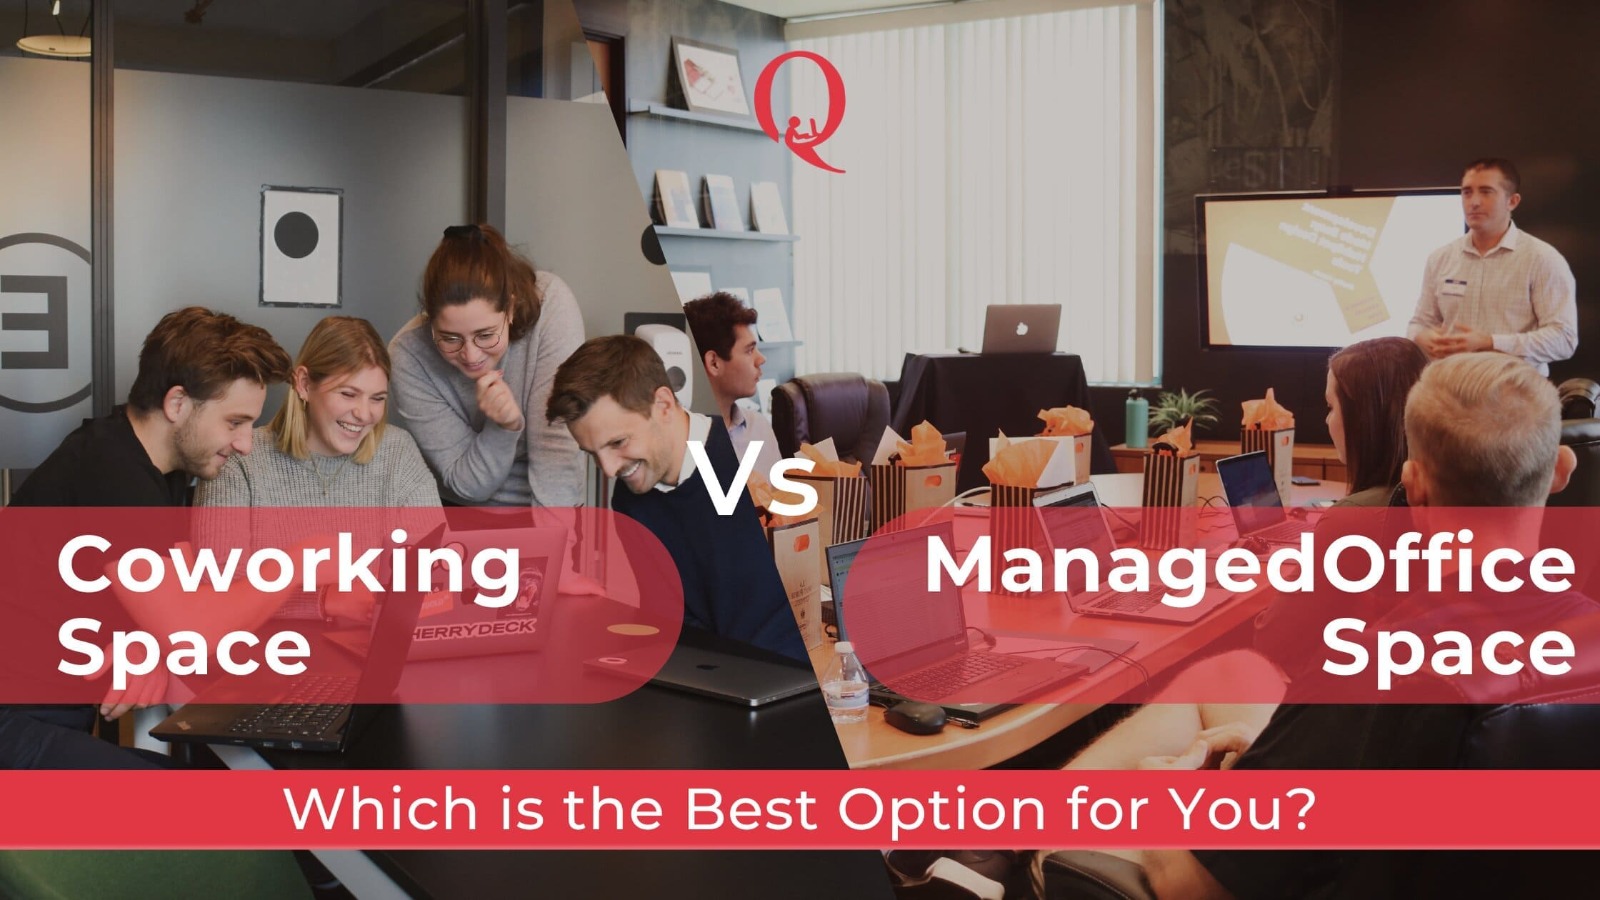 Coworking space vs managed office space